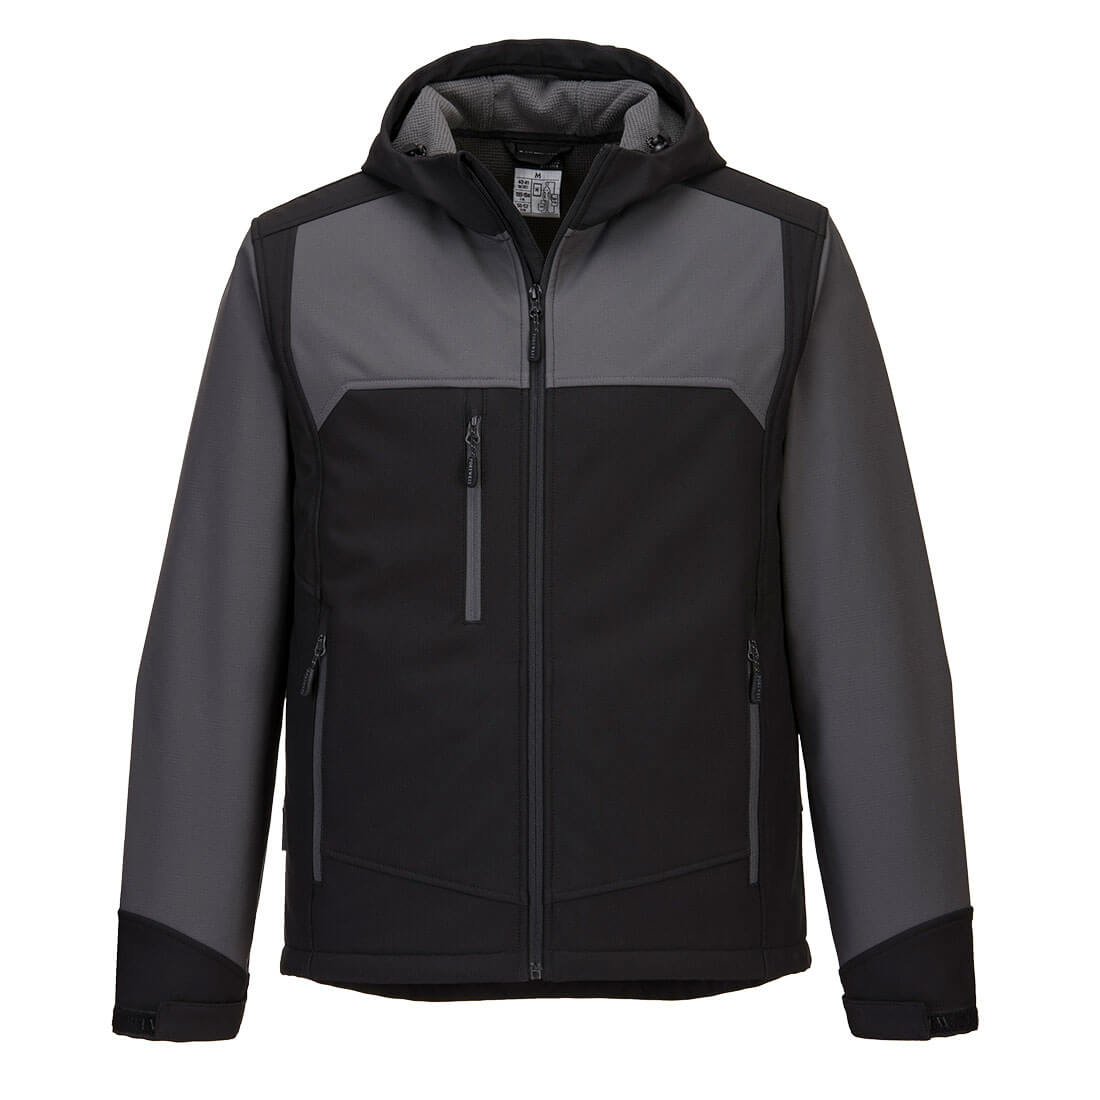 This Softshell Jacket is expertly crafted with an innovative ripstop fabric that is waterproof, breathable, and wind-resistant.